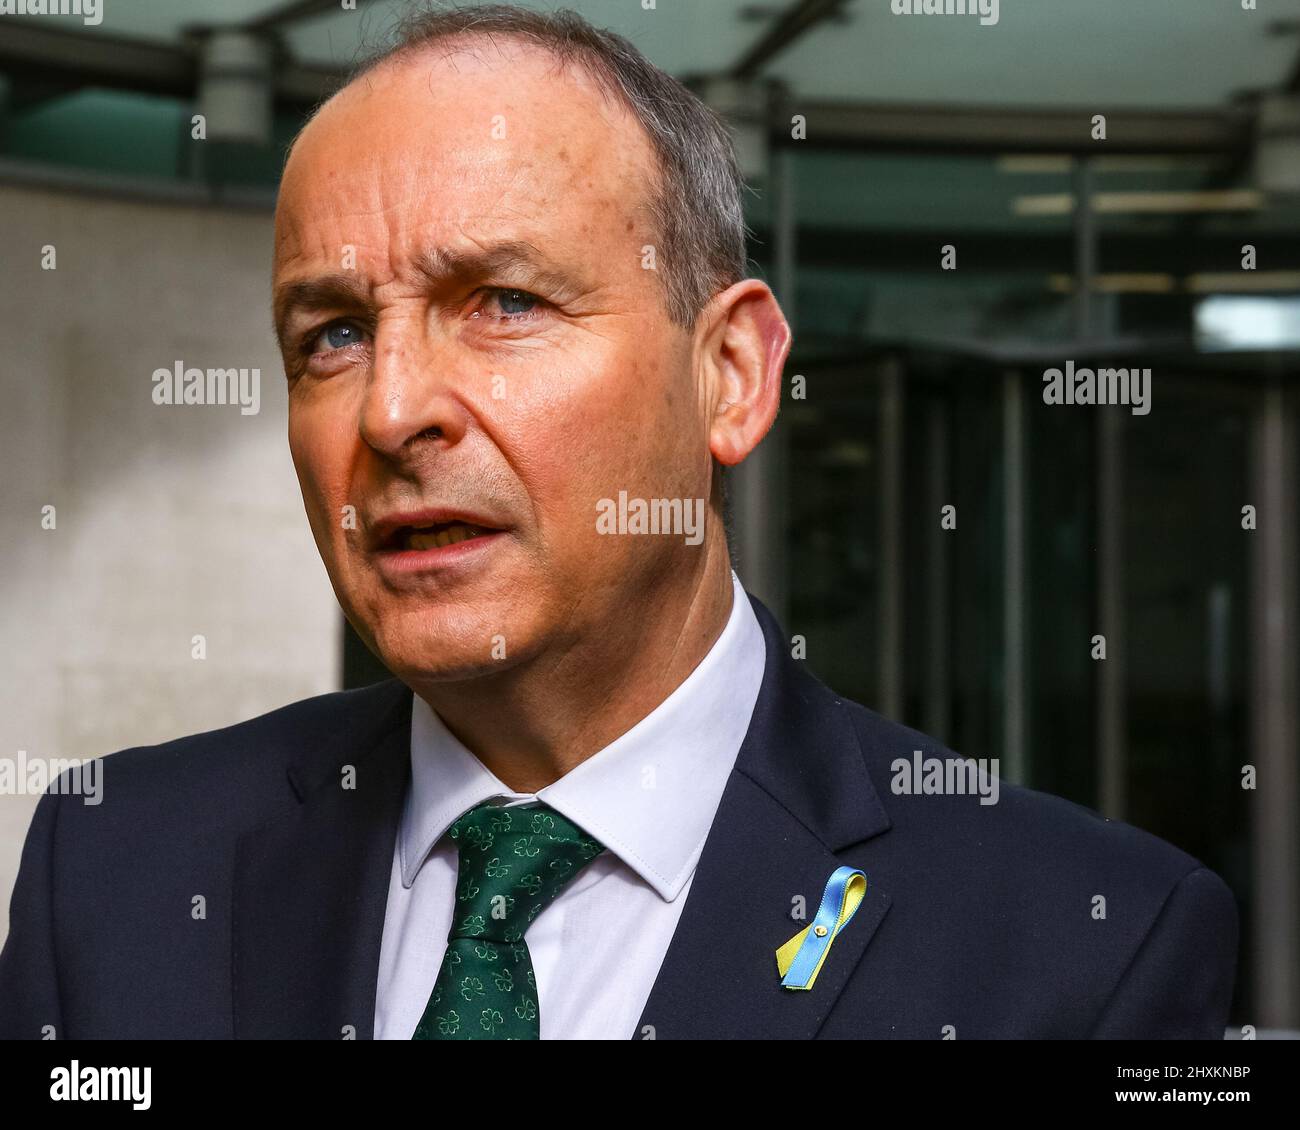 London, UK. 13th Mar, 2022. Micheál Martin, Irish Taoiseach (Prime Minister) at the BBC for an interview. Credit: Imageplotter/Alamy Live News Stock Photo